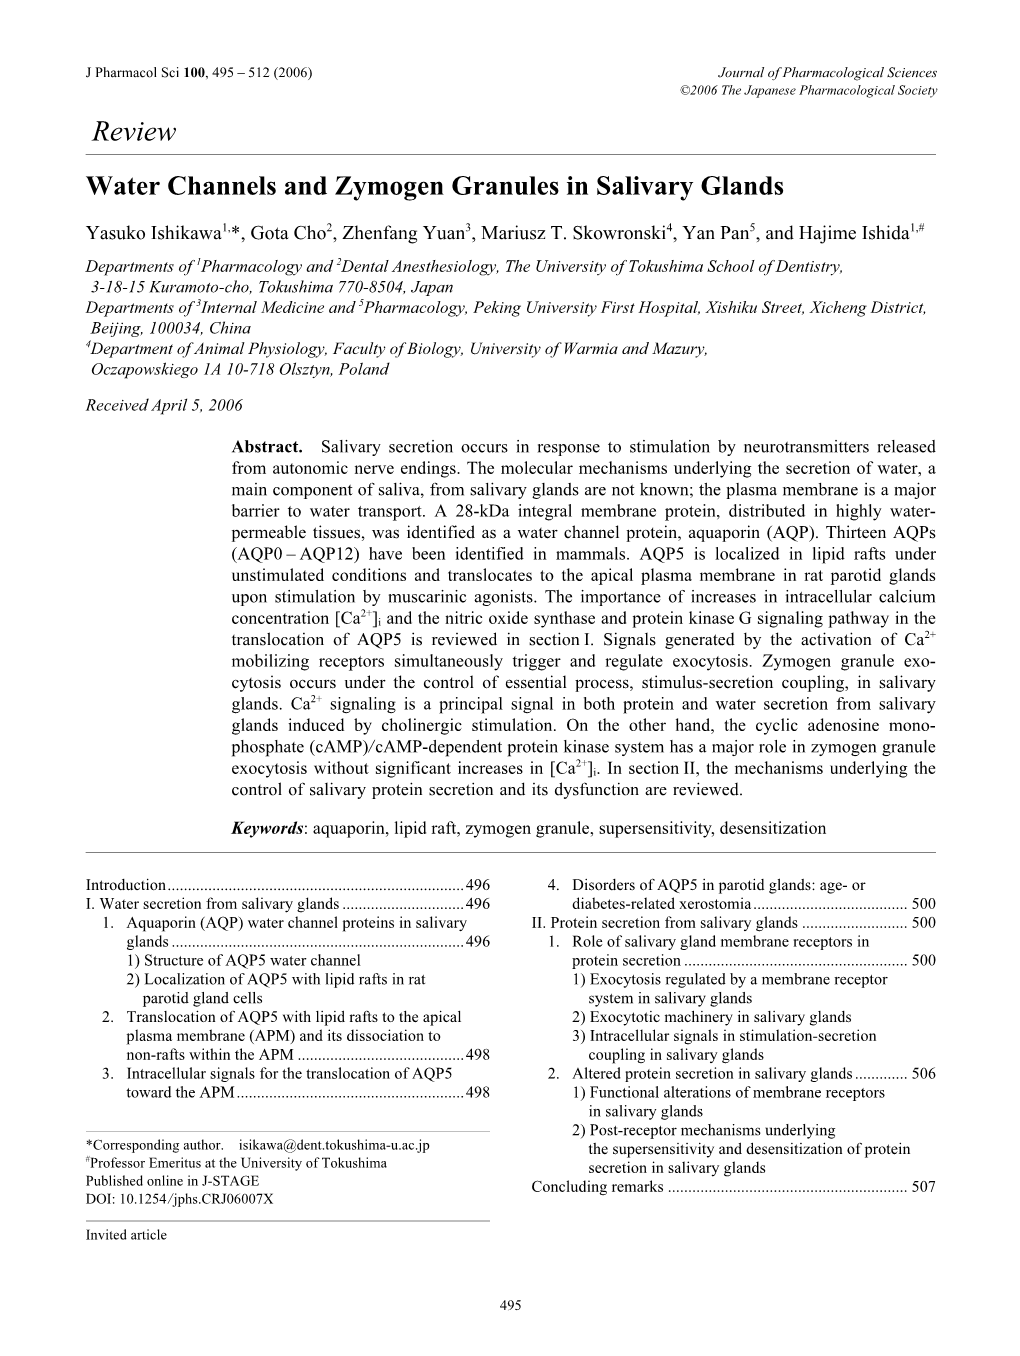 Water Channels and Zymogen Granules in Salivary Glands